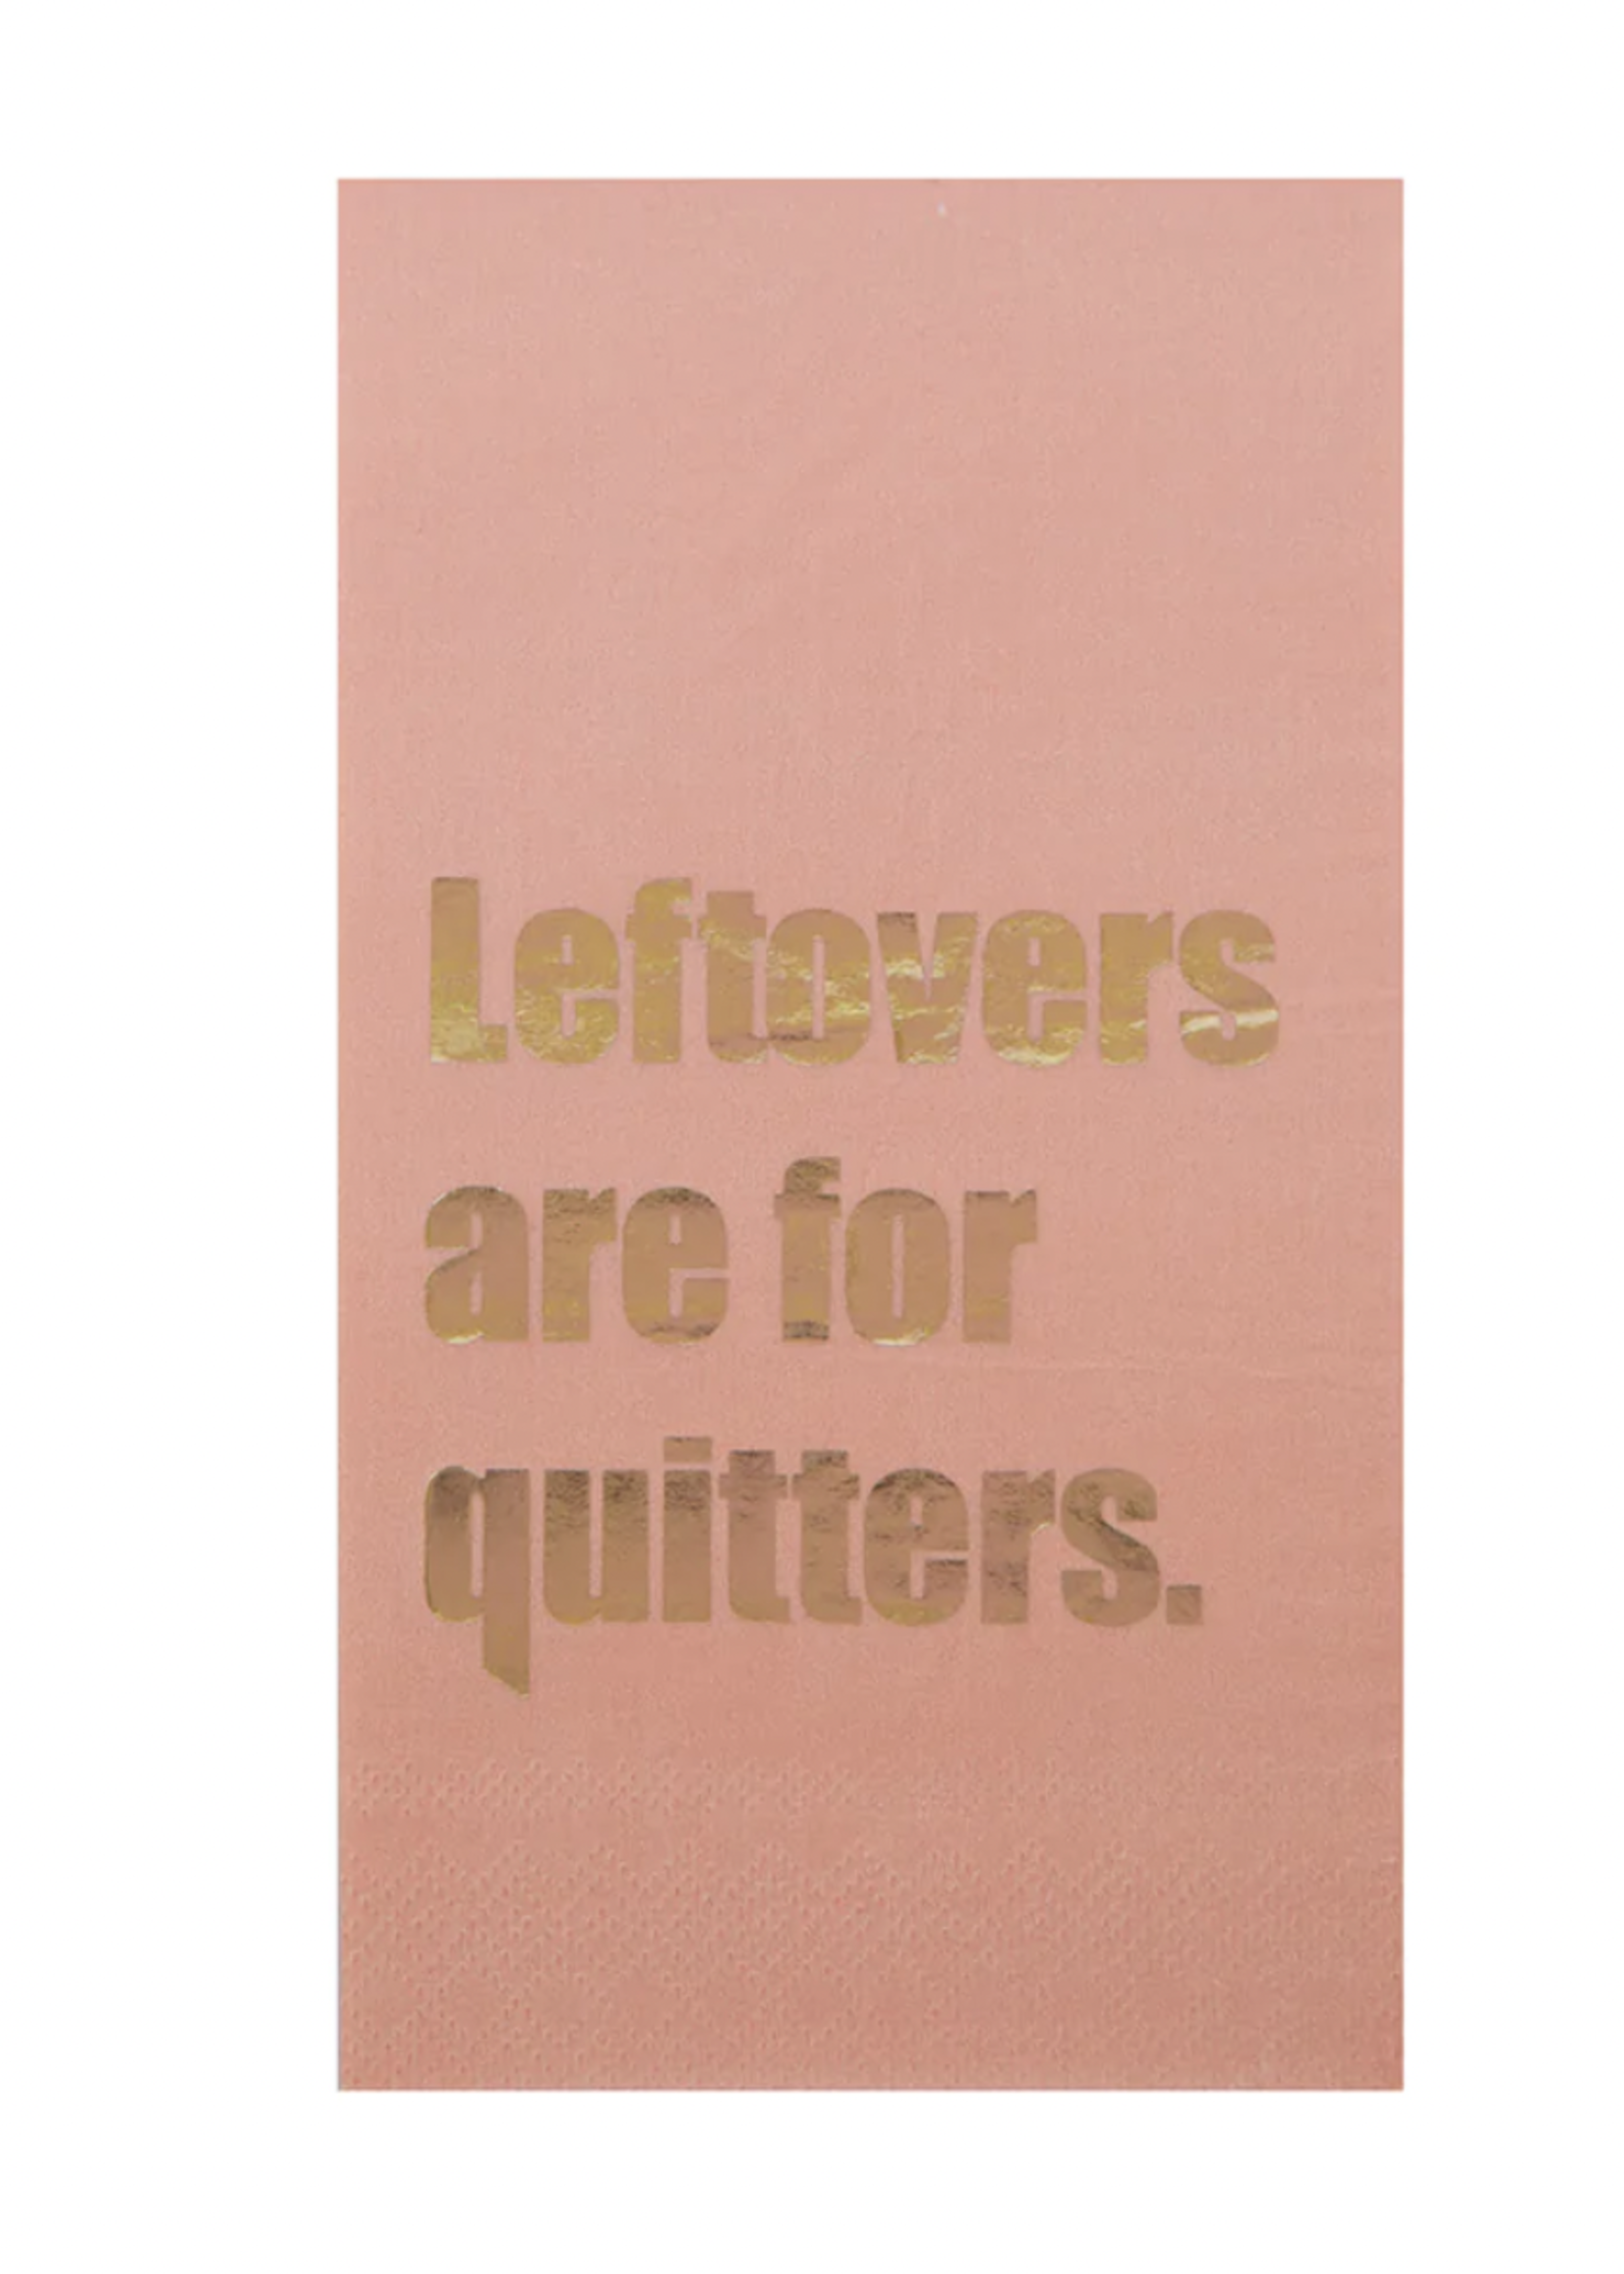 Creative Twist Events 'LEFTOVERS ARE FOR QUITTERS' GUEST NAPKINS